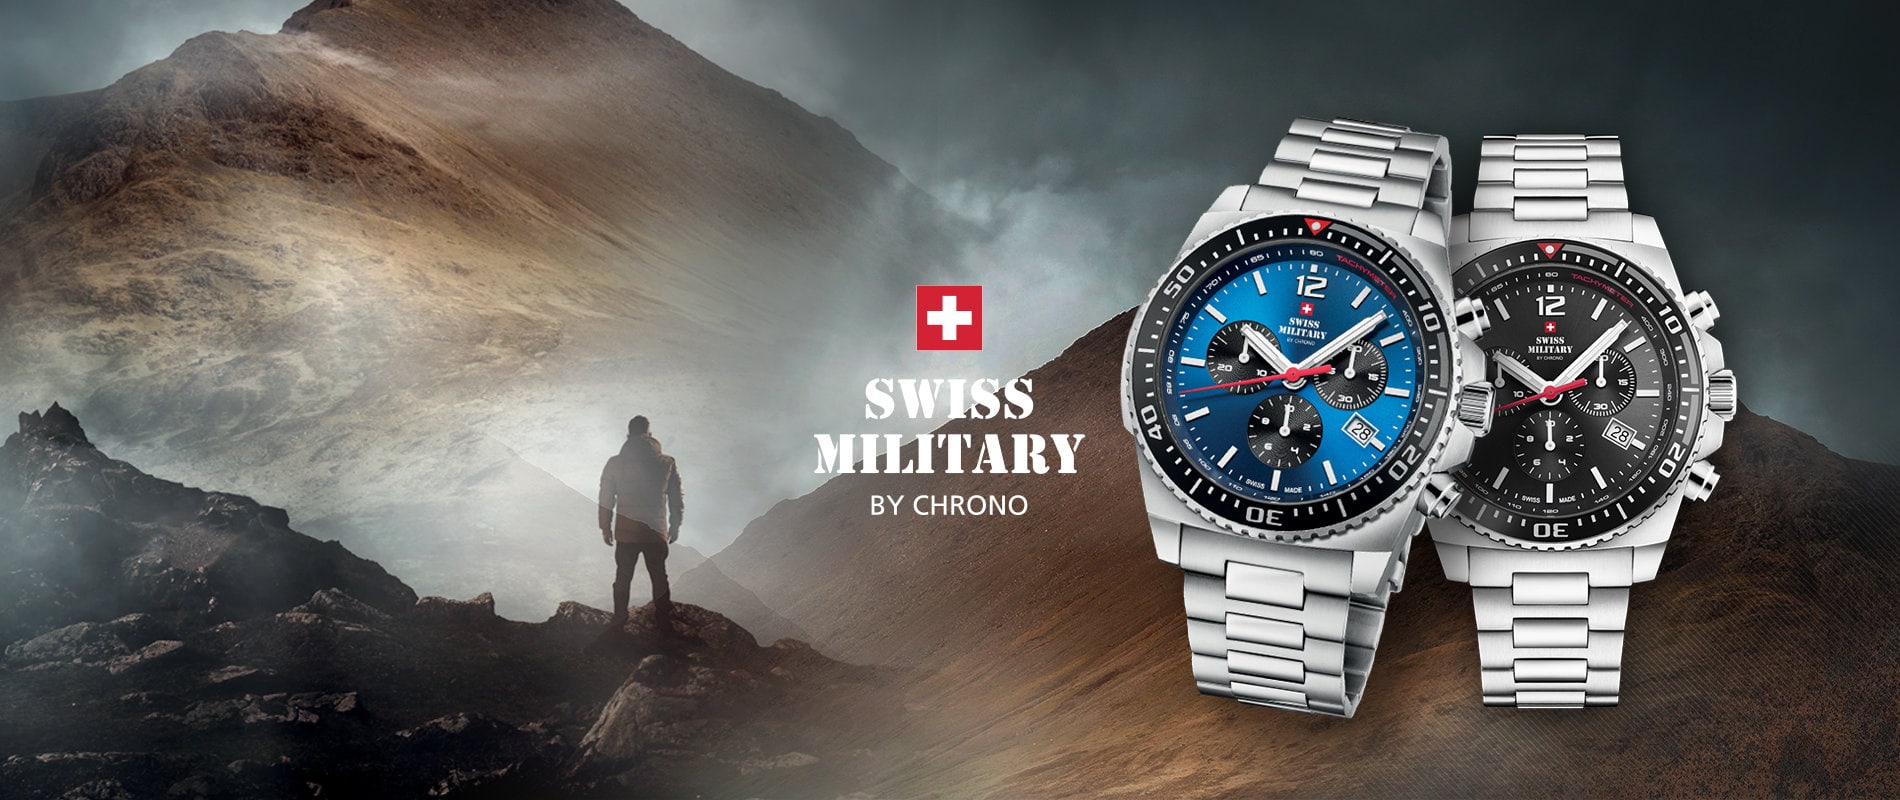 SWISS MILITARY BY CHRONO AUTOMATIC SPECIAL EDITION  TWO TONES STAINLESS STEEL BRACELET